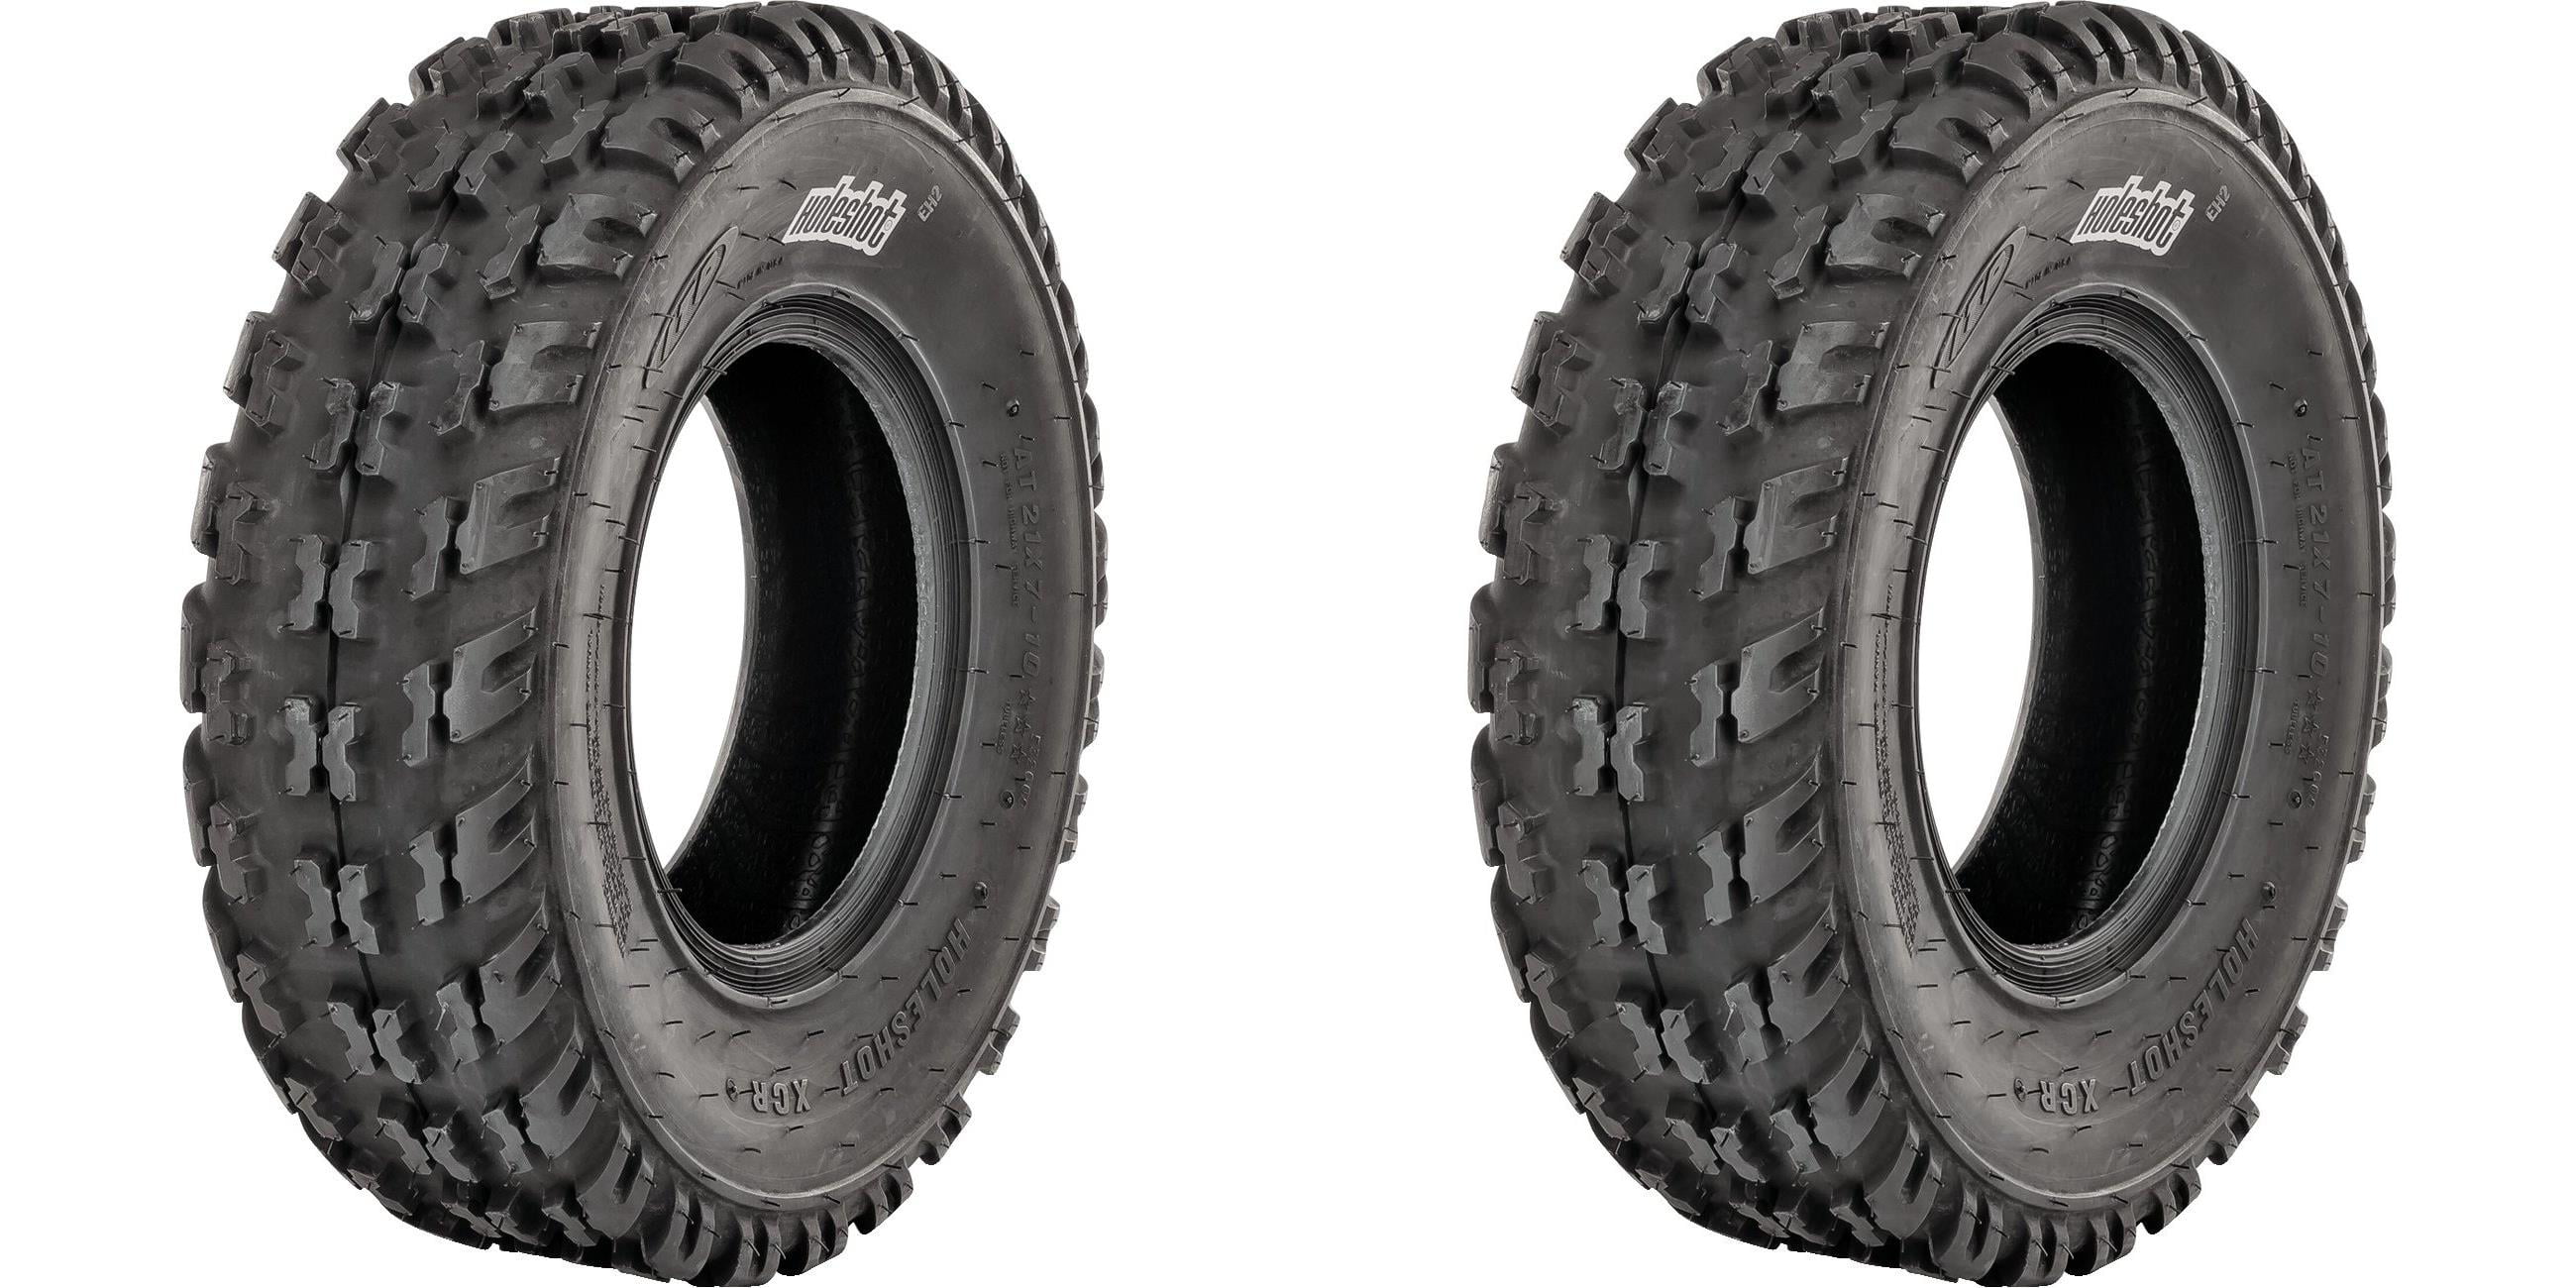 Holeshot XCR Tire Front 21x7-10 6-ply